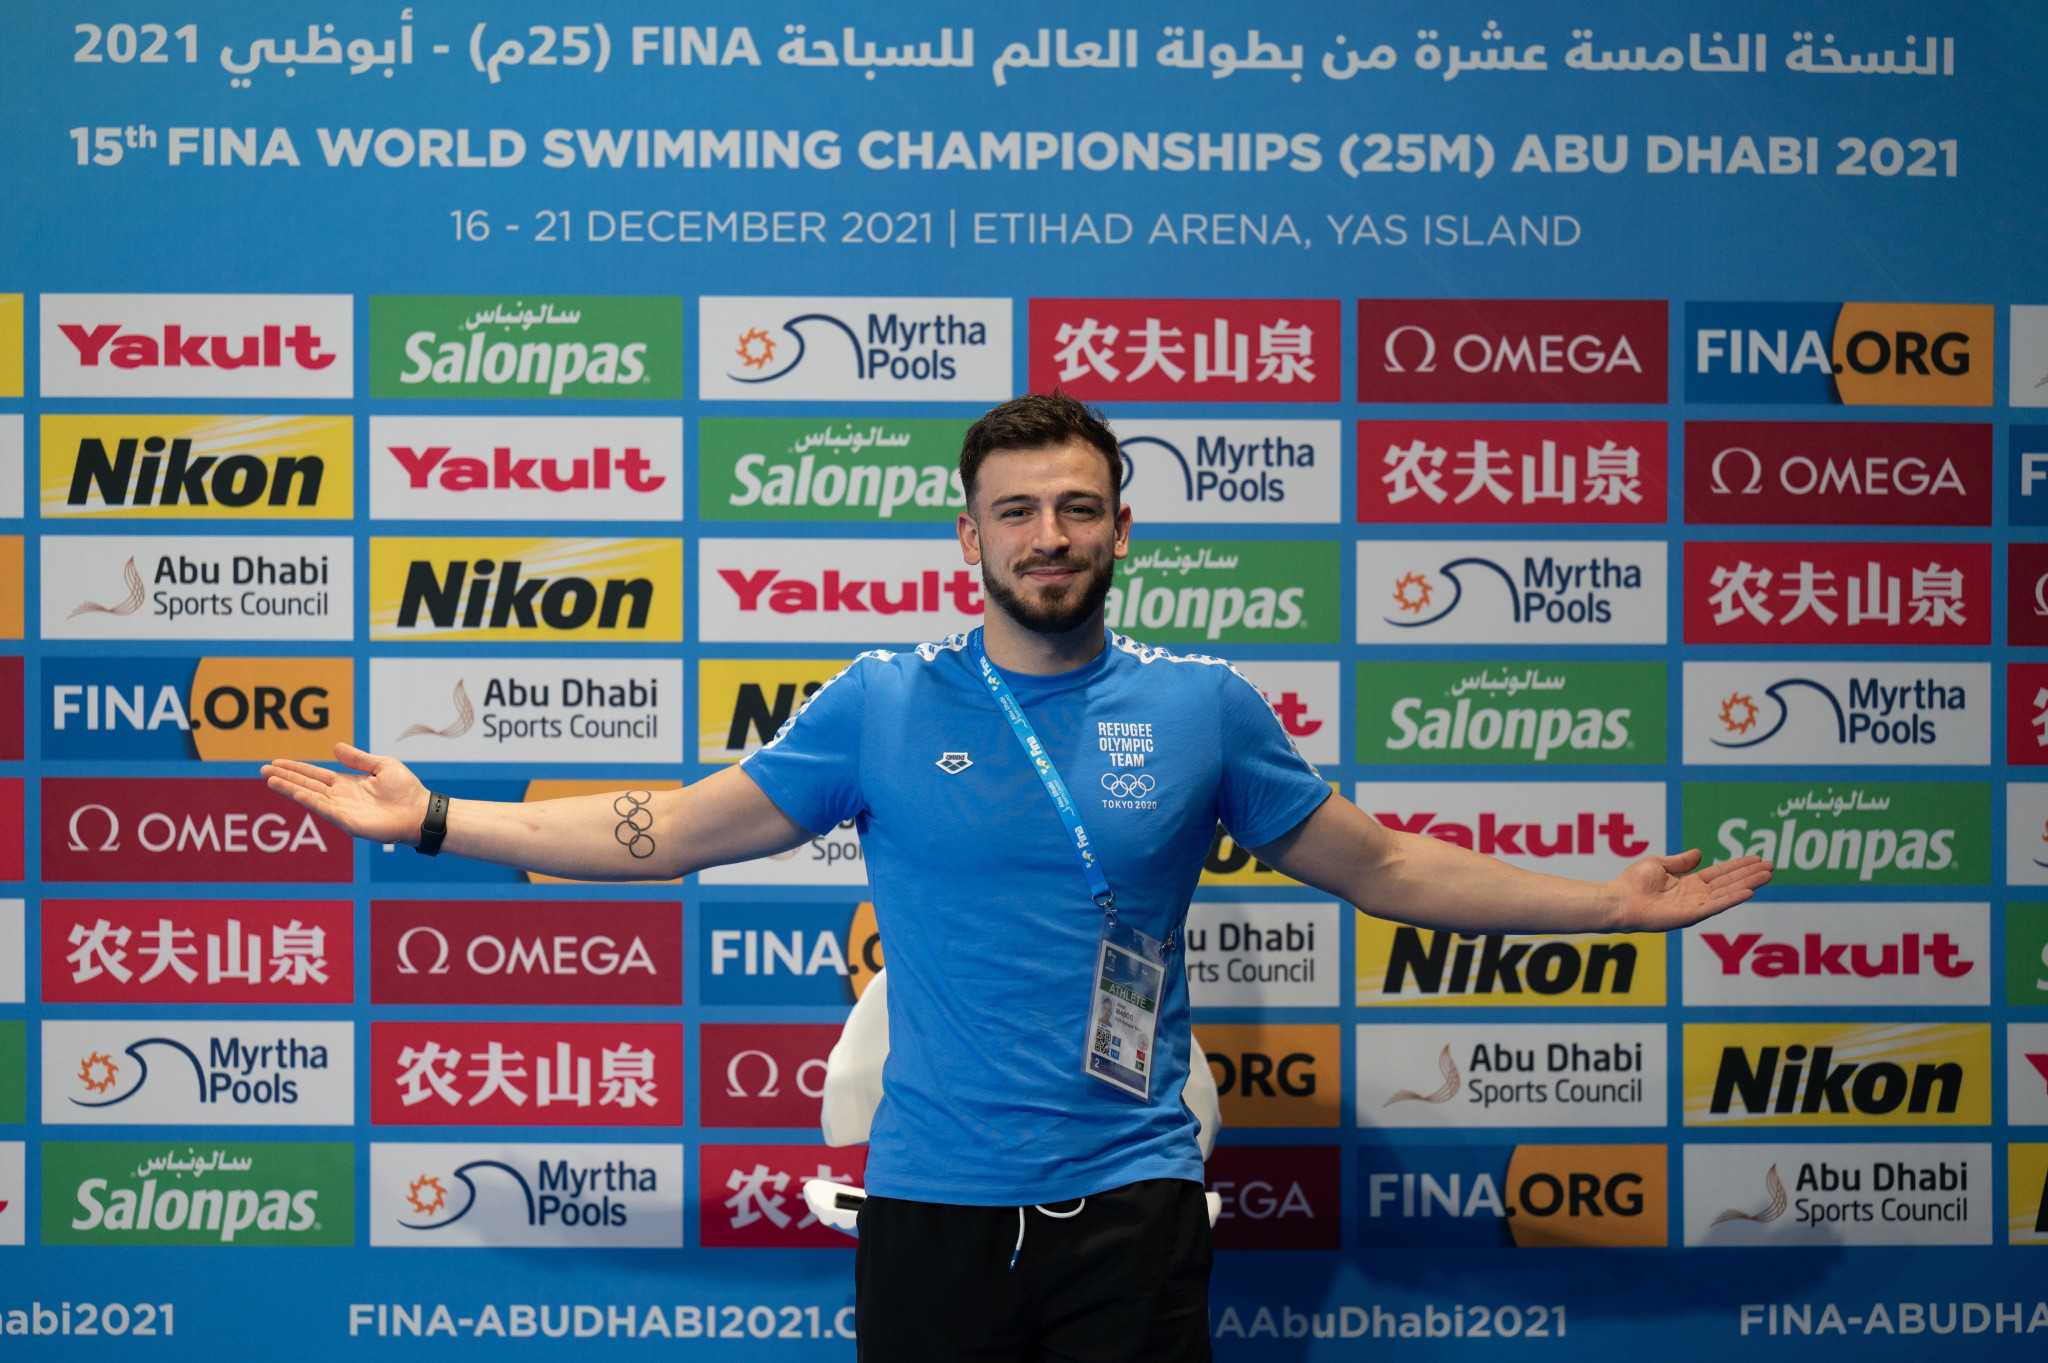 Alaa Maso has been selected to represent the FINA Refugee Team at the World Swimming Championships (25m) ©FINA